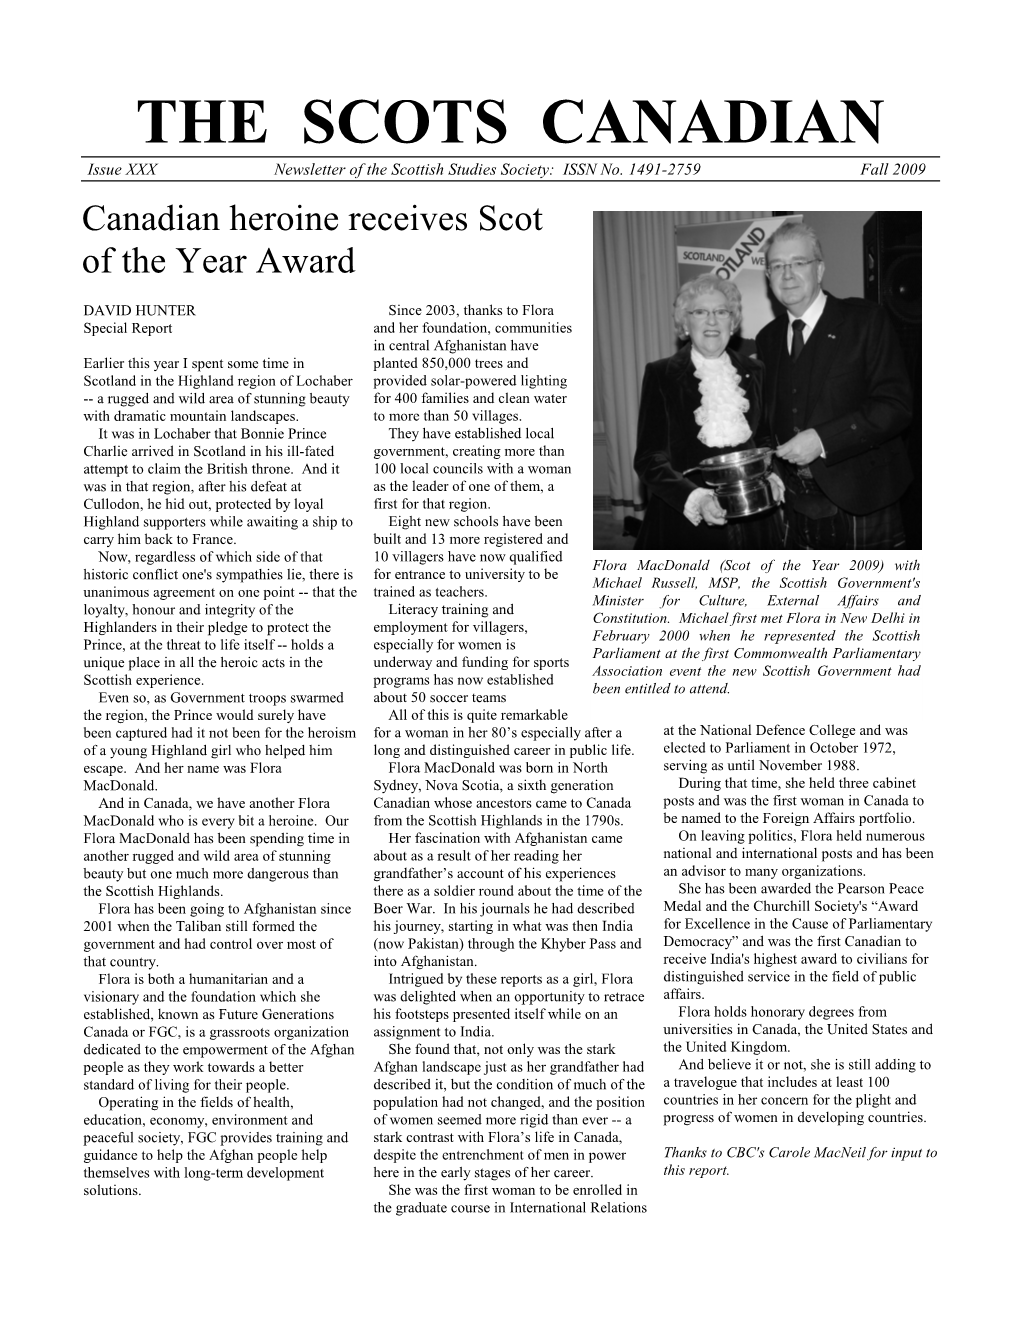 Fall 2009 Canadian Heroine Receives Scot of the Year Award